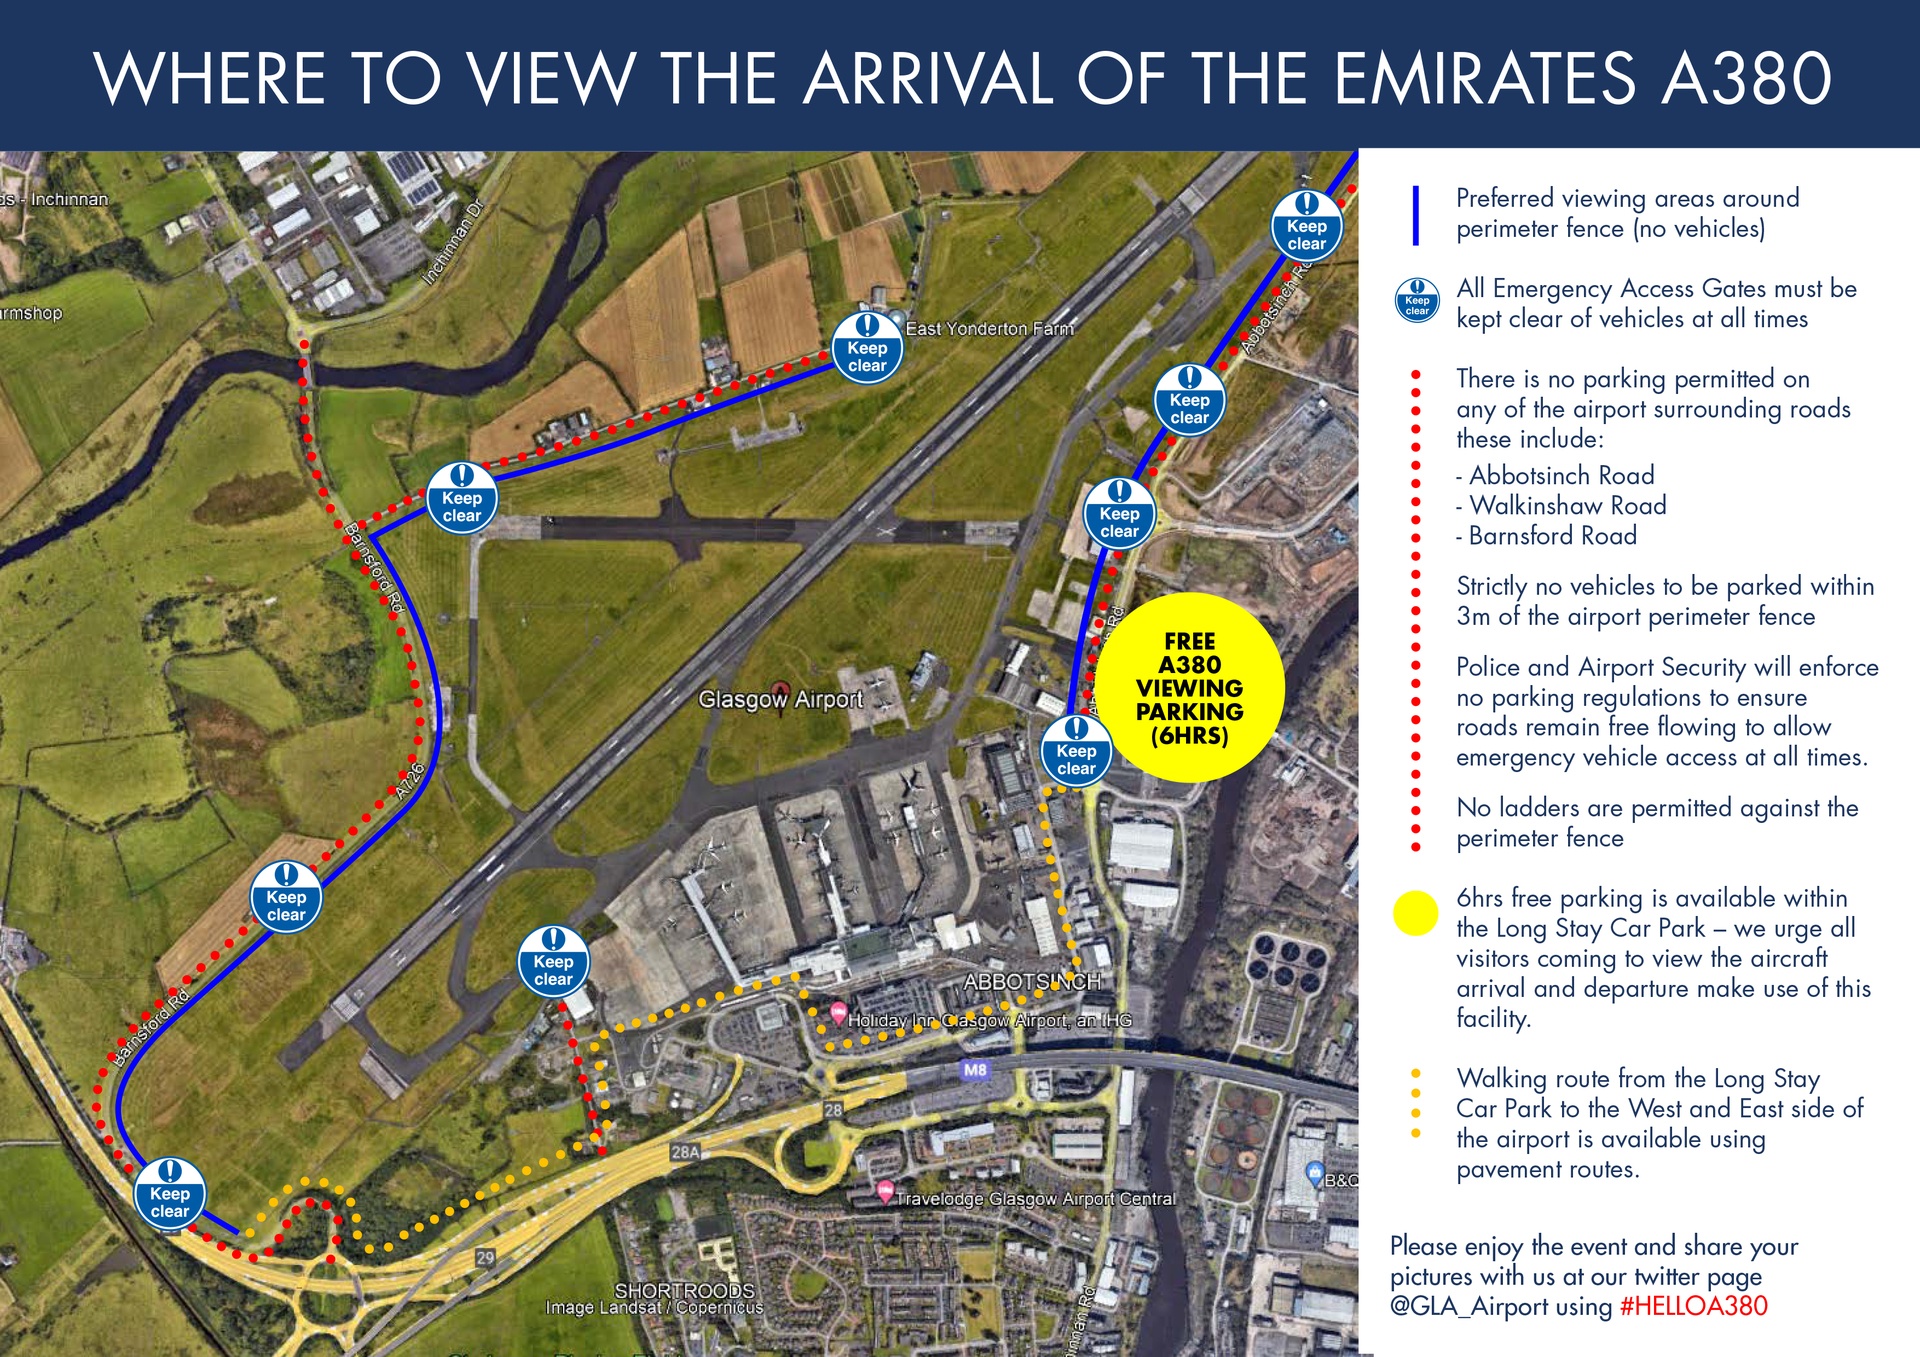 Glasgow Airport has issued a map showing where people can gather and access to free parking.